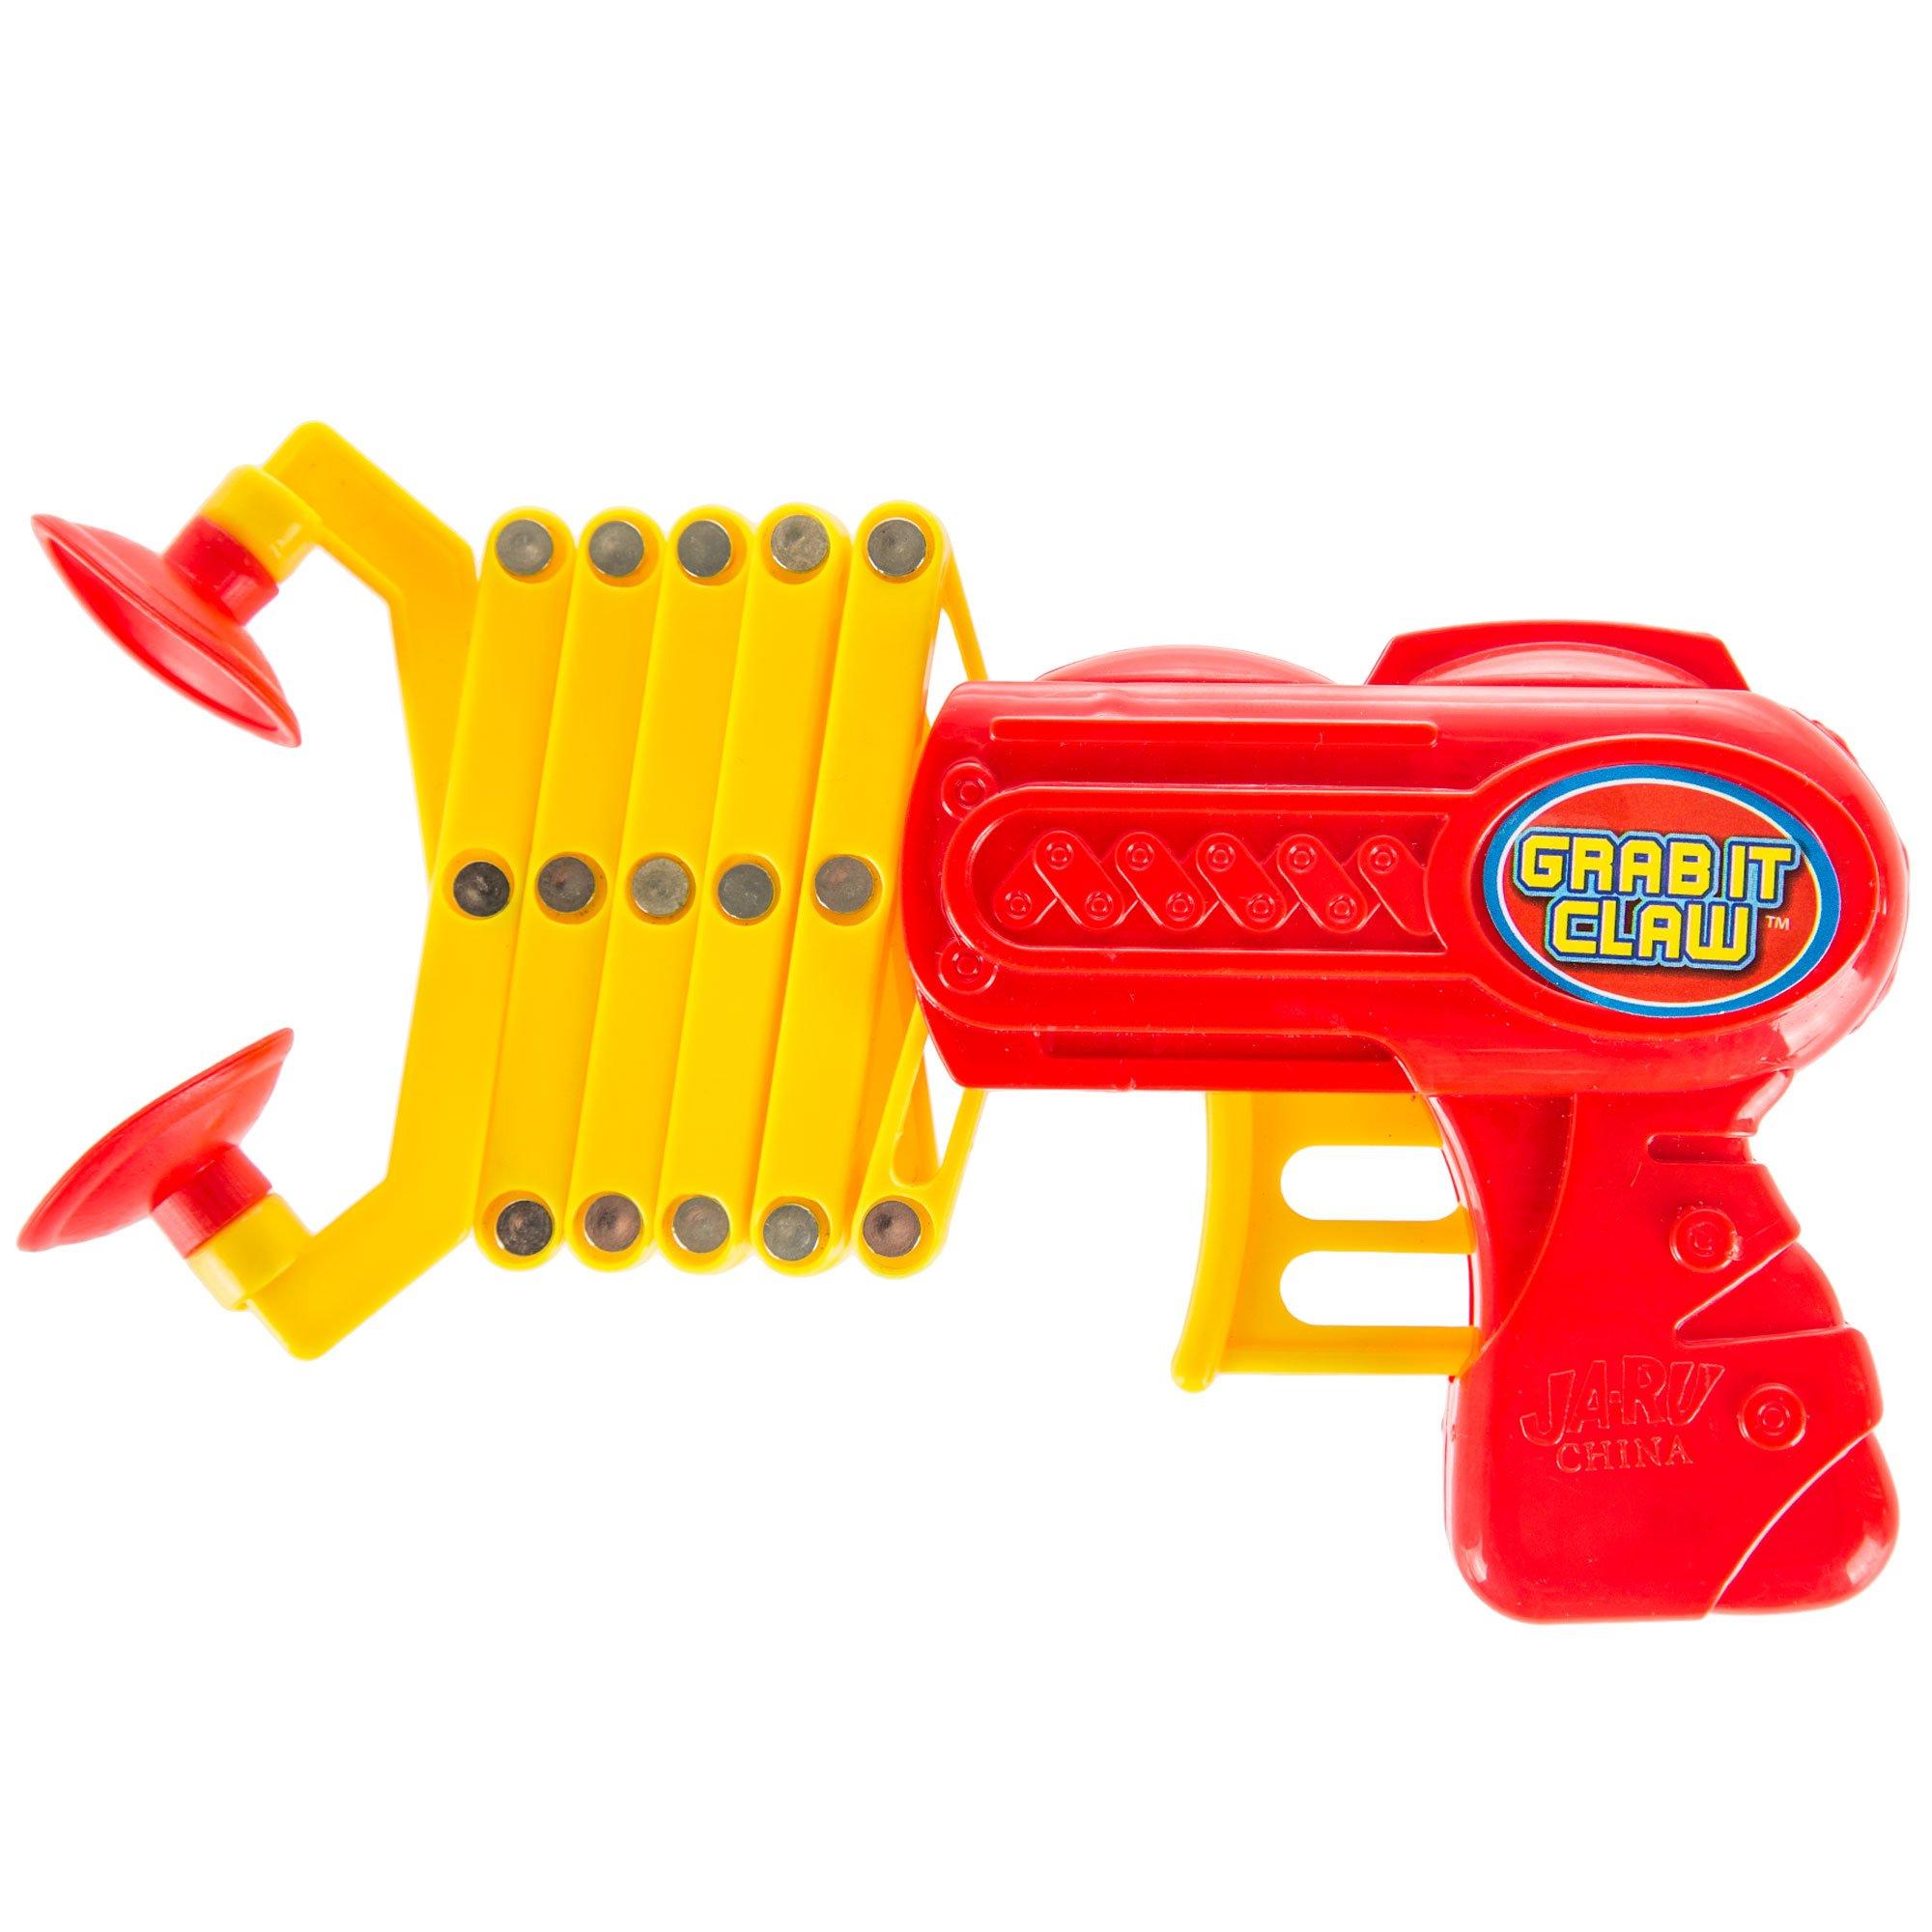  Grab-It Huge Claw Blaster/Gun Extends 12 Funny Gag Novelty Toy  : Toys & Games